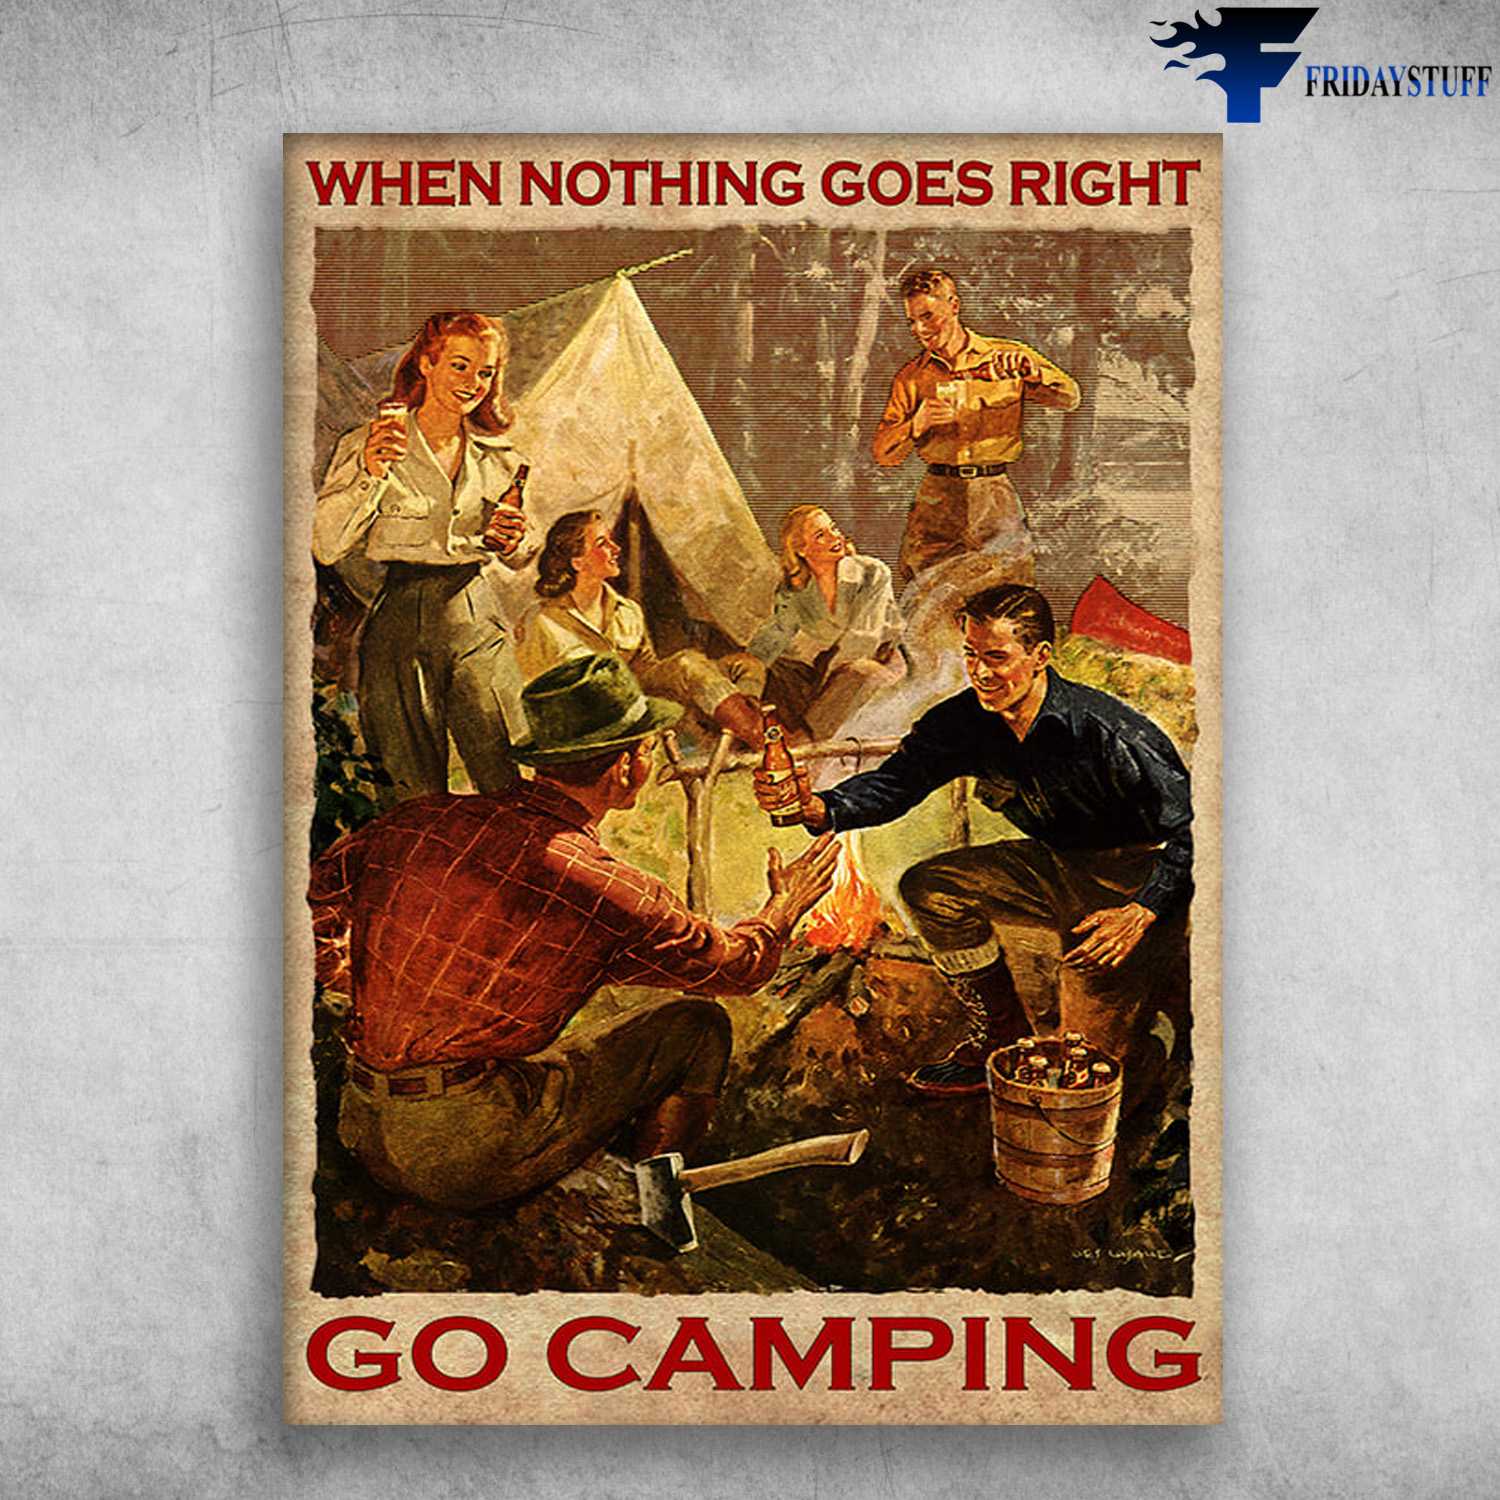 Camping Lover, Camping Poster, When Nothing Goes Right, Go Camping